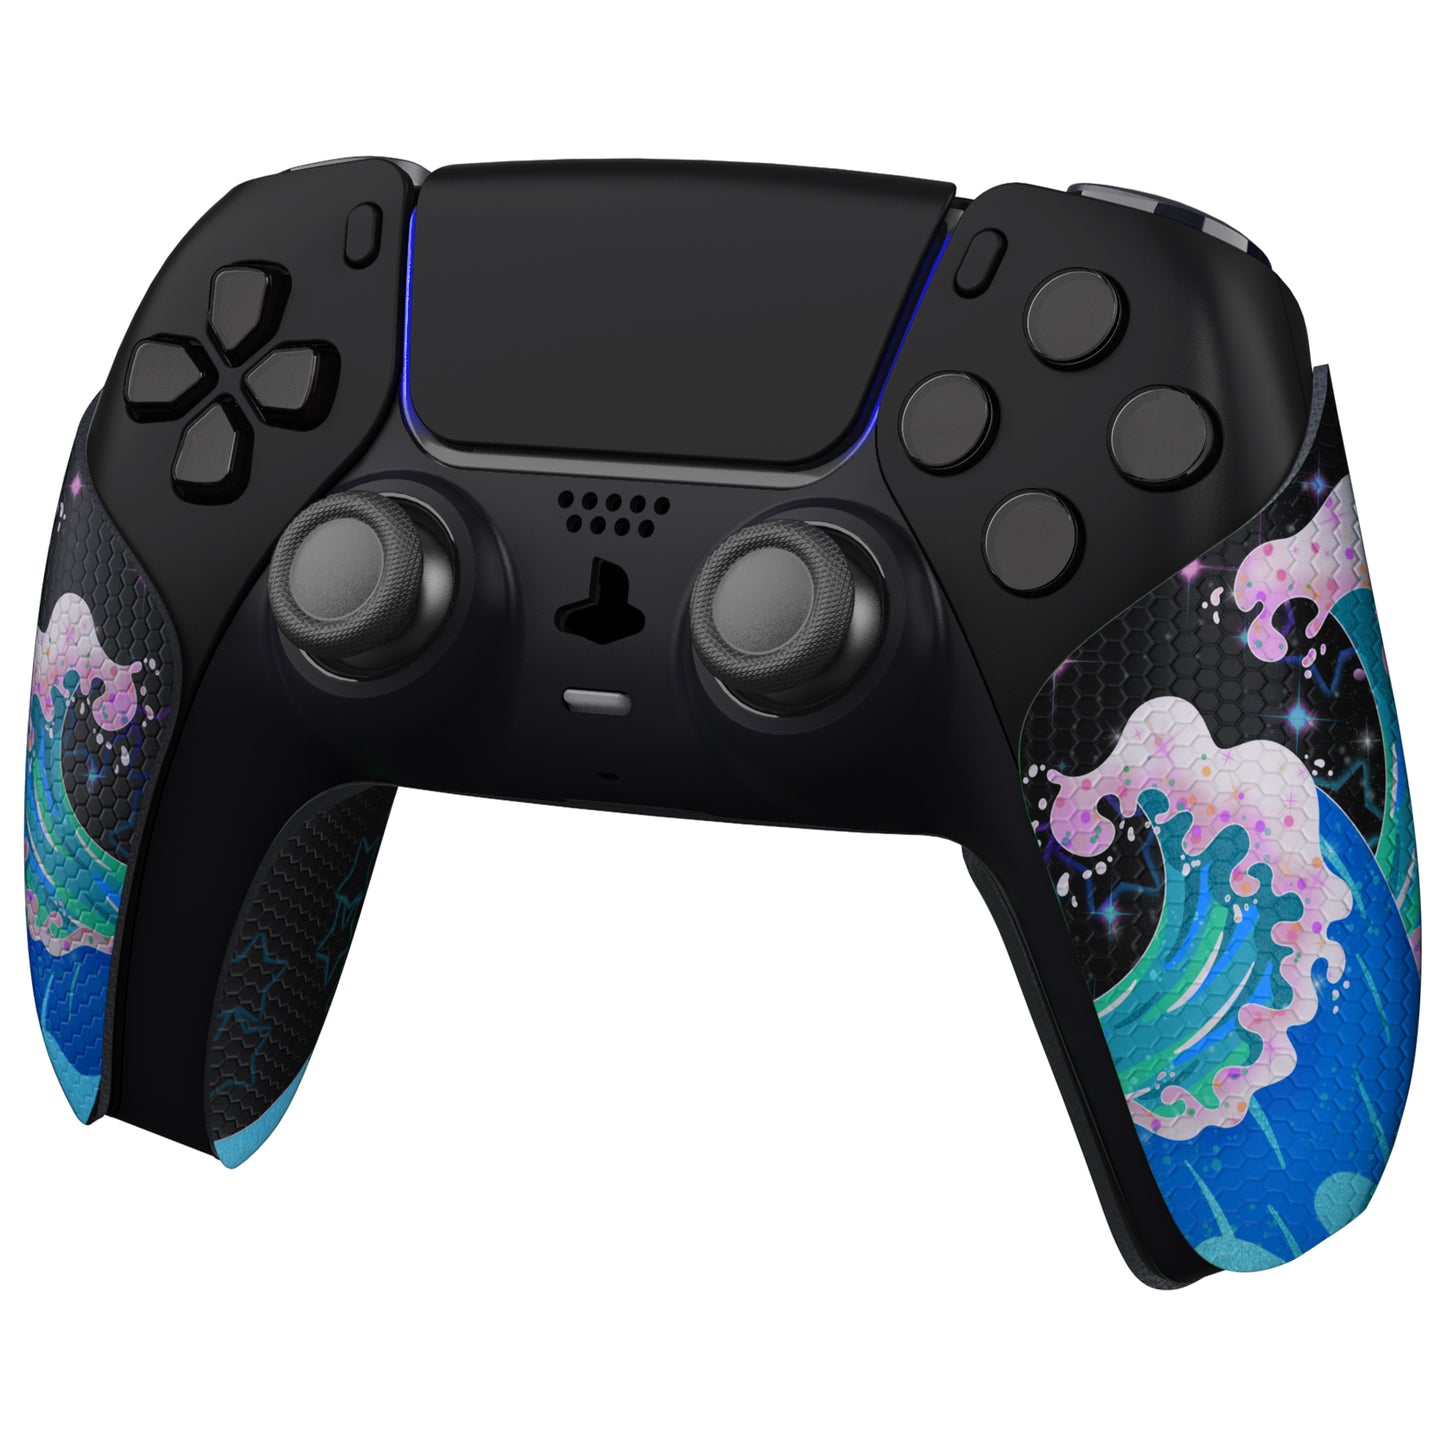 PlayVital Shimmering Waves Anti-Skid Sweat-Absorbent Controller Grip for PS5 Controller, Professional Textured Soft Rubber Pads Handle Grips for PS5 Controller - PFPJ106 PlayVital